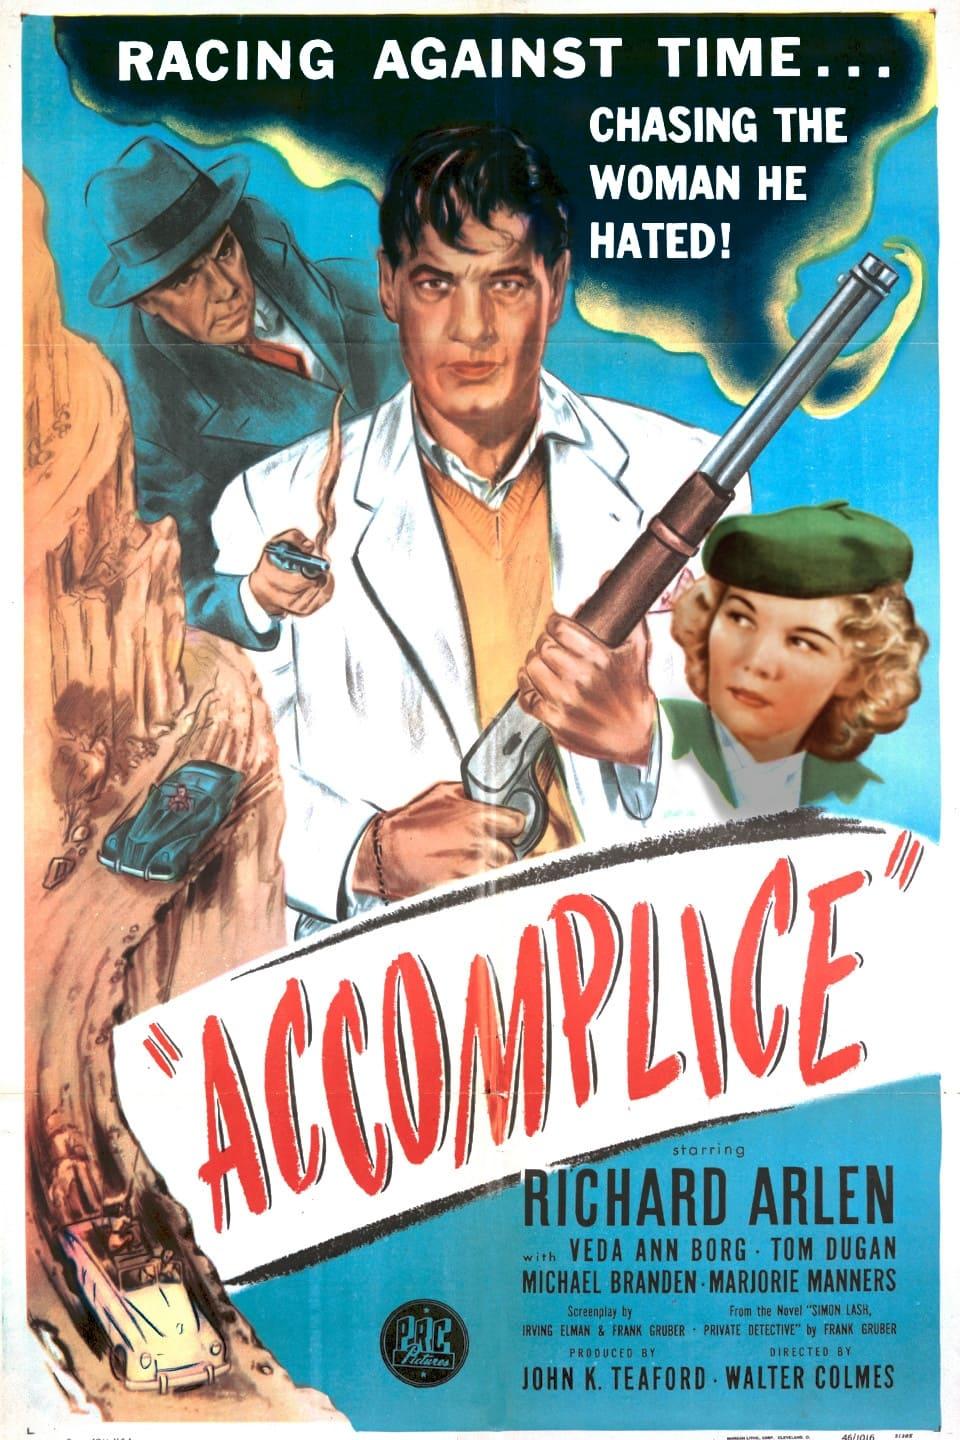 Accomplice poster